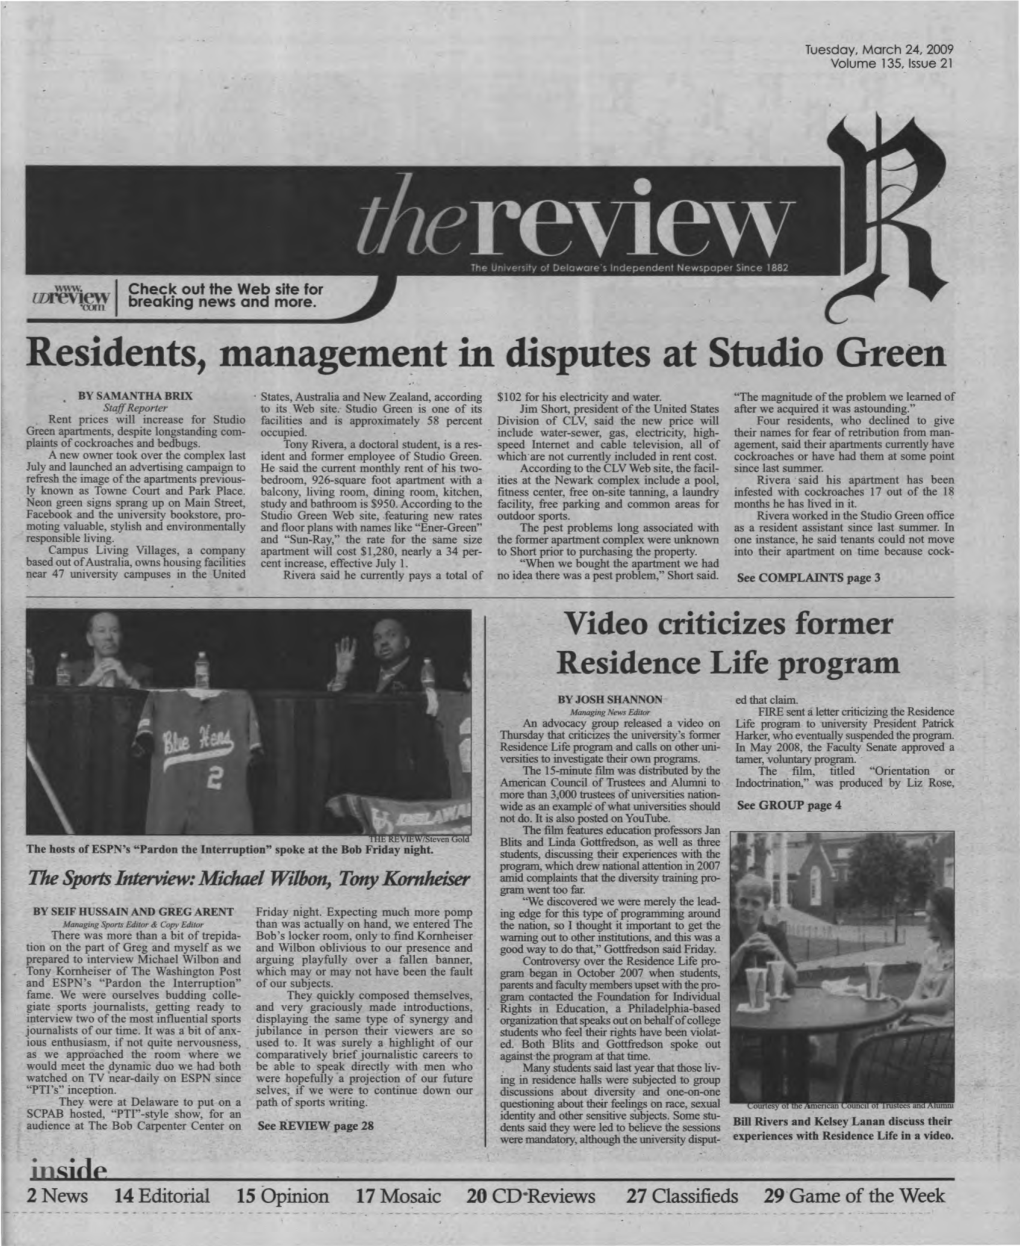 Residents, Management in Disputes at Studio Green